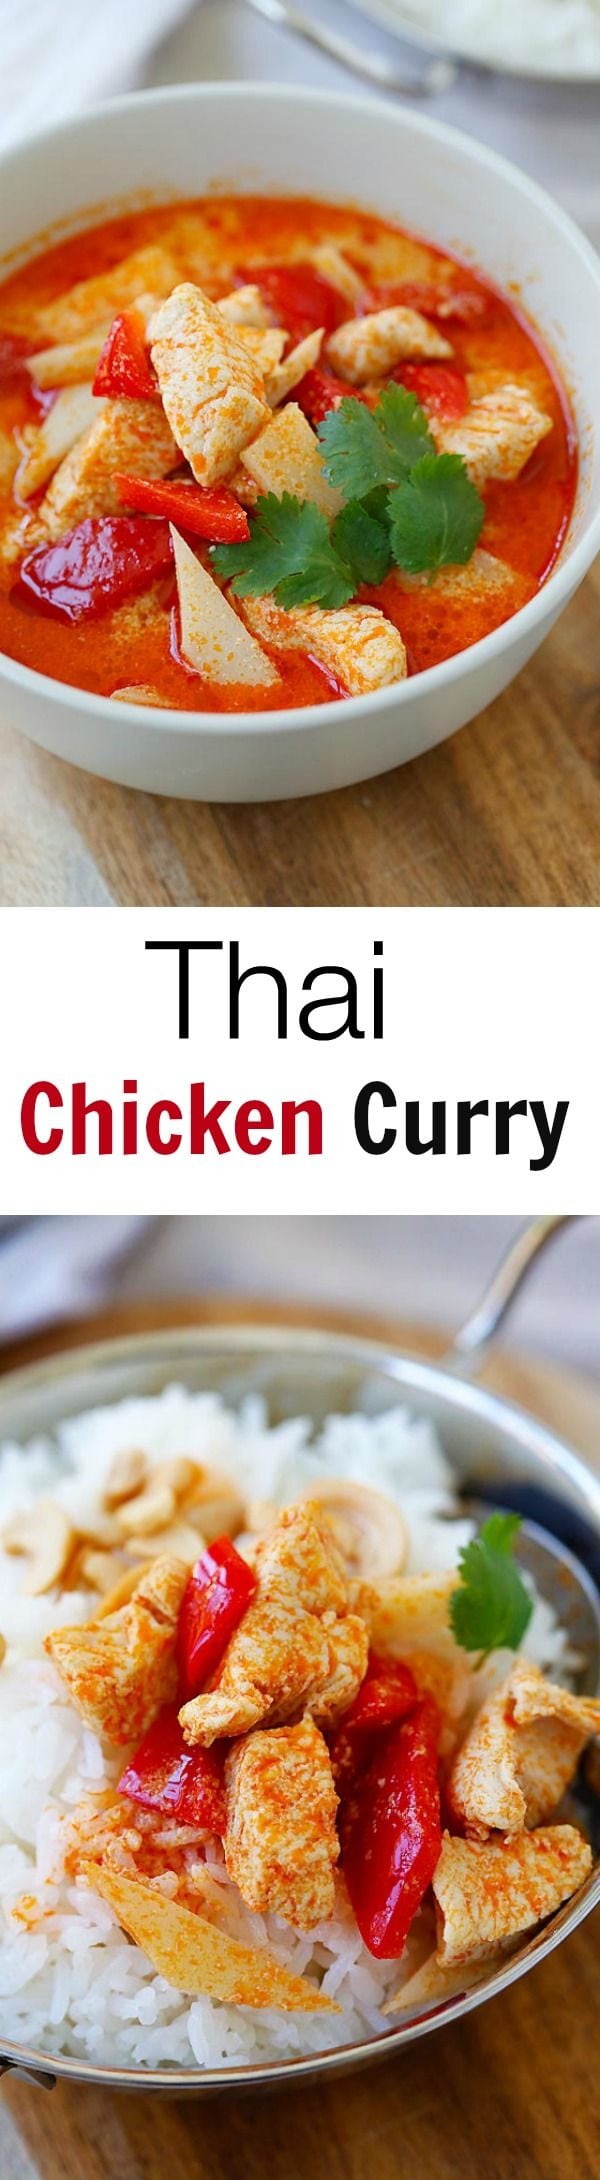 Thai Chicken Curry - homemade Thai chicken curry is SO easy to make with simple ingredients. It's a zillion times better and healthier than takeout! | rasamalaysia.com